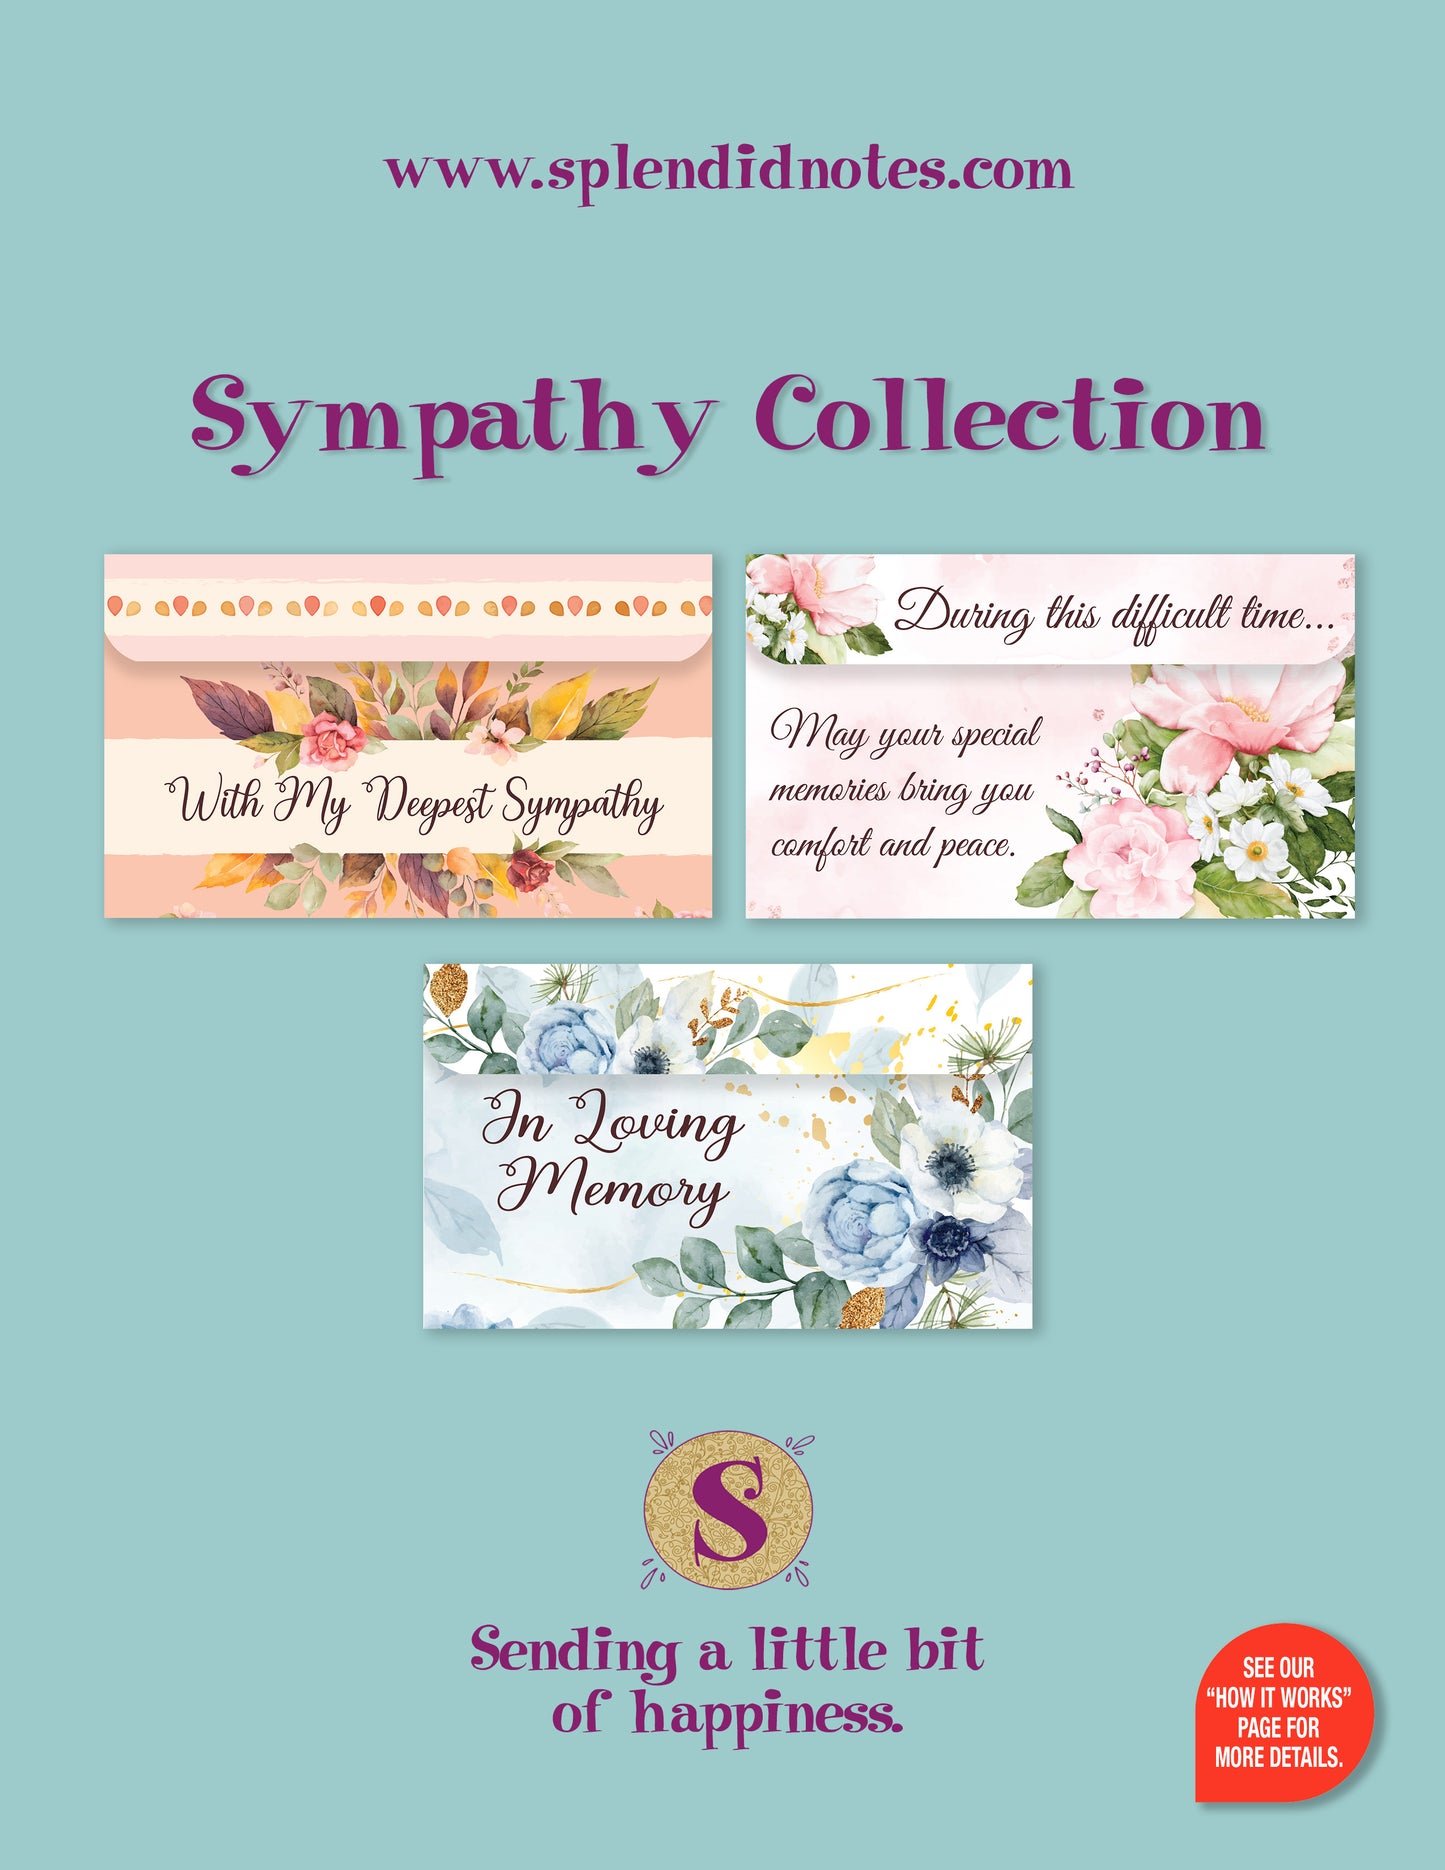 Sympathy Collection